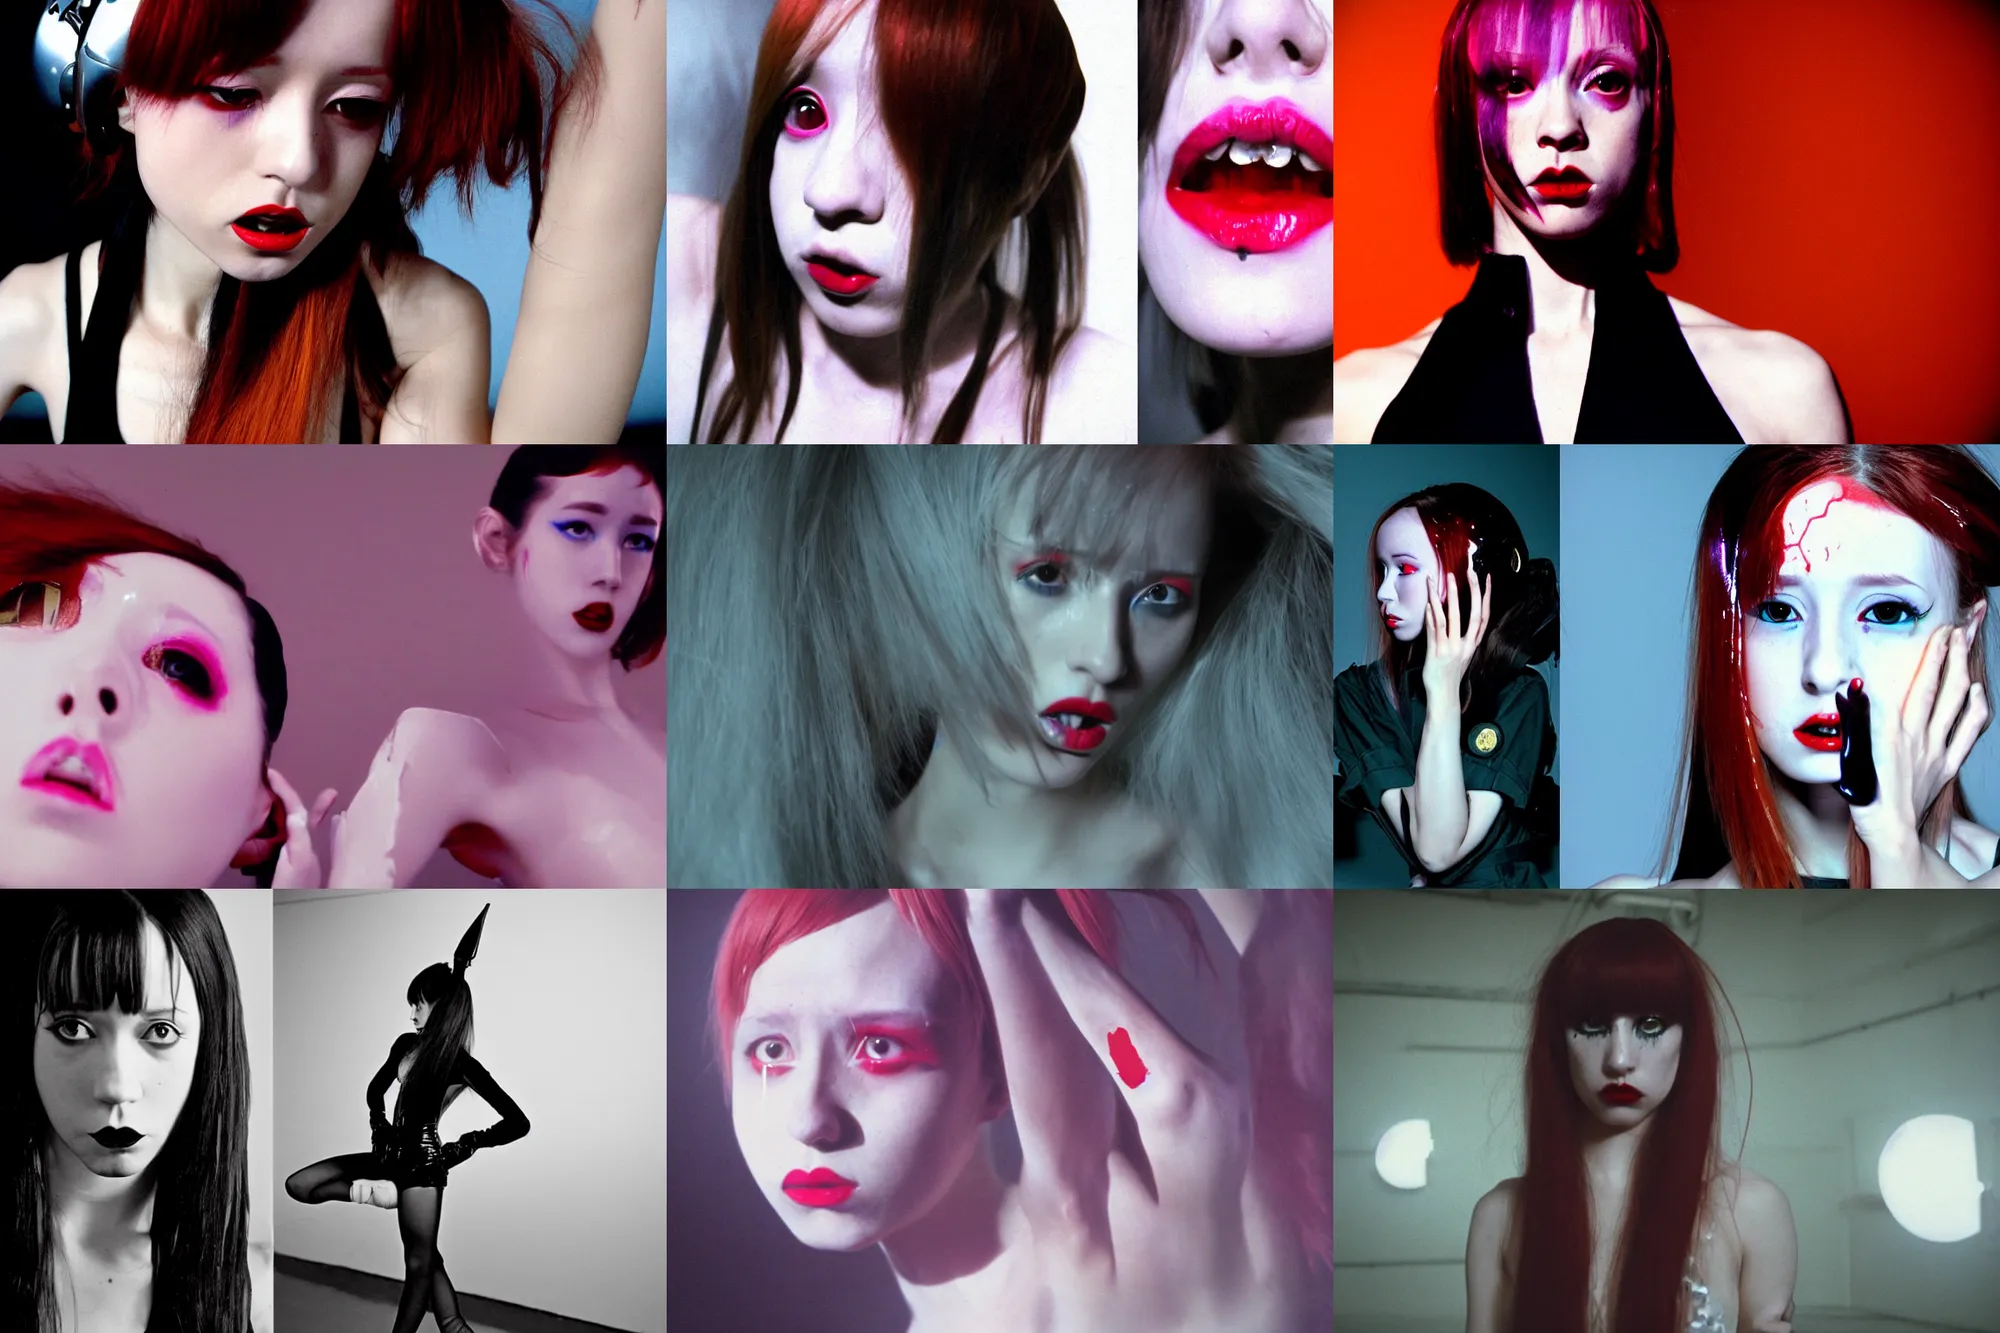 Prompt: Demonic Okiku Holly Herndon style occult tenshen monogatari Fashion photography portrait tokyo top gun(1980) movie still from doom dance scene of model, pointé pose;pursed lips, athletic, terrified 👿 , gaze down,harajuku hair, wearing refracting mercury diffusion melting plastic Balenciaga designed specular highlights anti-g pilot suit, half covered in heavy glowing coal, embers to waist, , ,eye contact, ultra realistic, Panavision Panaflex X , Technicolor, 8K, 35mm lens, three point perspective, tilt shift dark mirror fractal orbs background, extreme closeup portrait, chiaroscuro, highly detailed, devine composition golden ration, by moma, by Nabbteeri by Sergey Piskunov